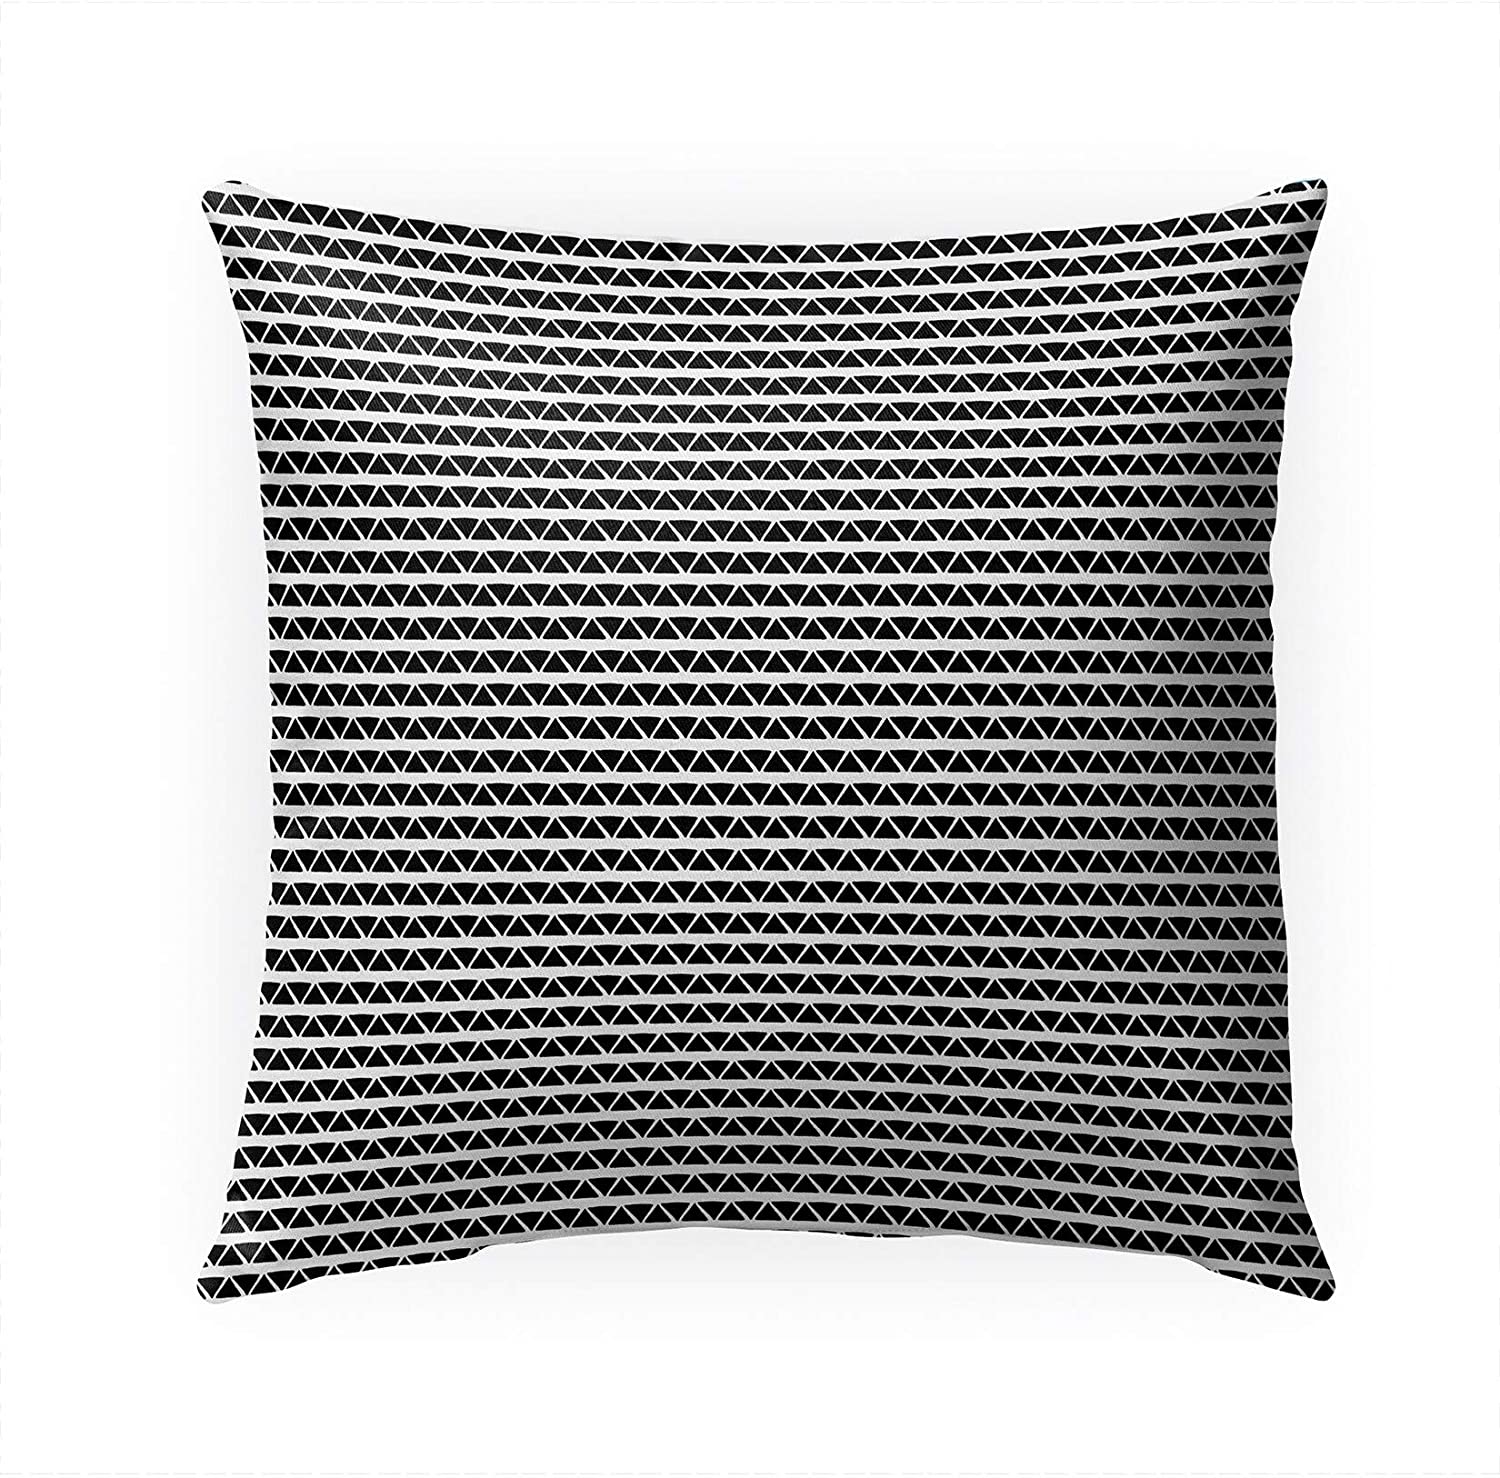 Triangle Tribal Pattern Indoor|Outdoor Pillow by Northern Whimsy 18x18 Black Geometric Modern Contemporary Polyester Removable Cover